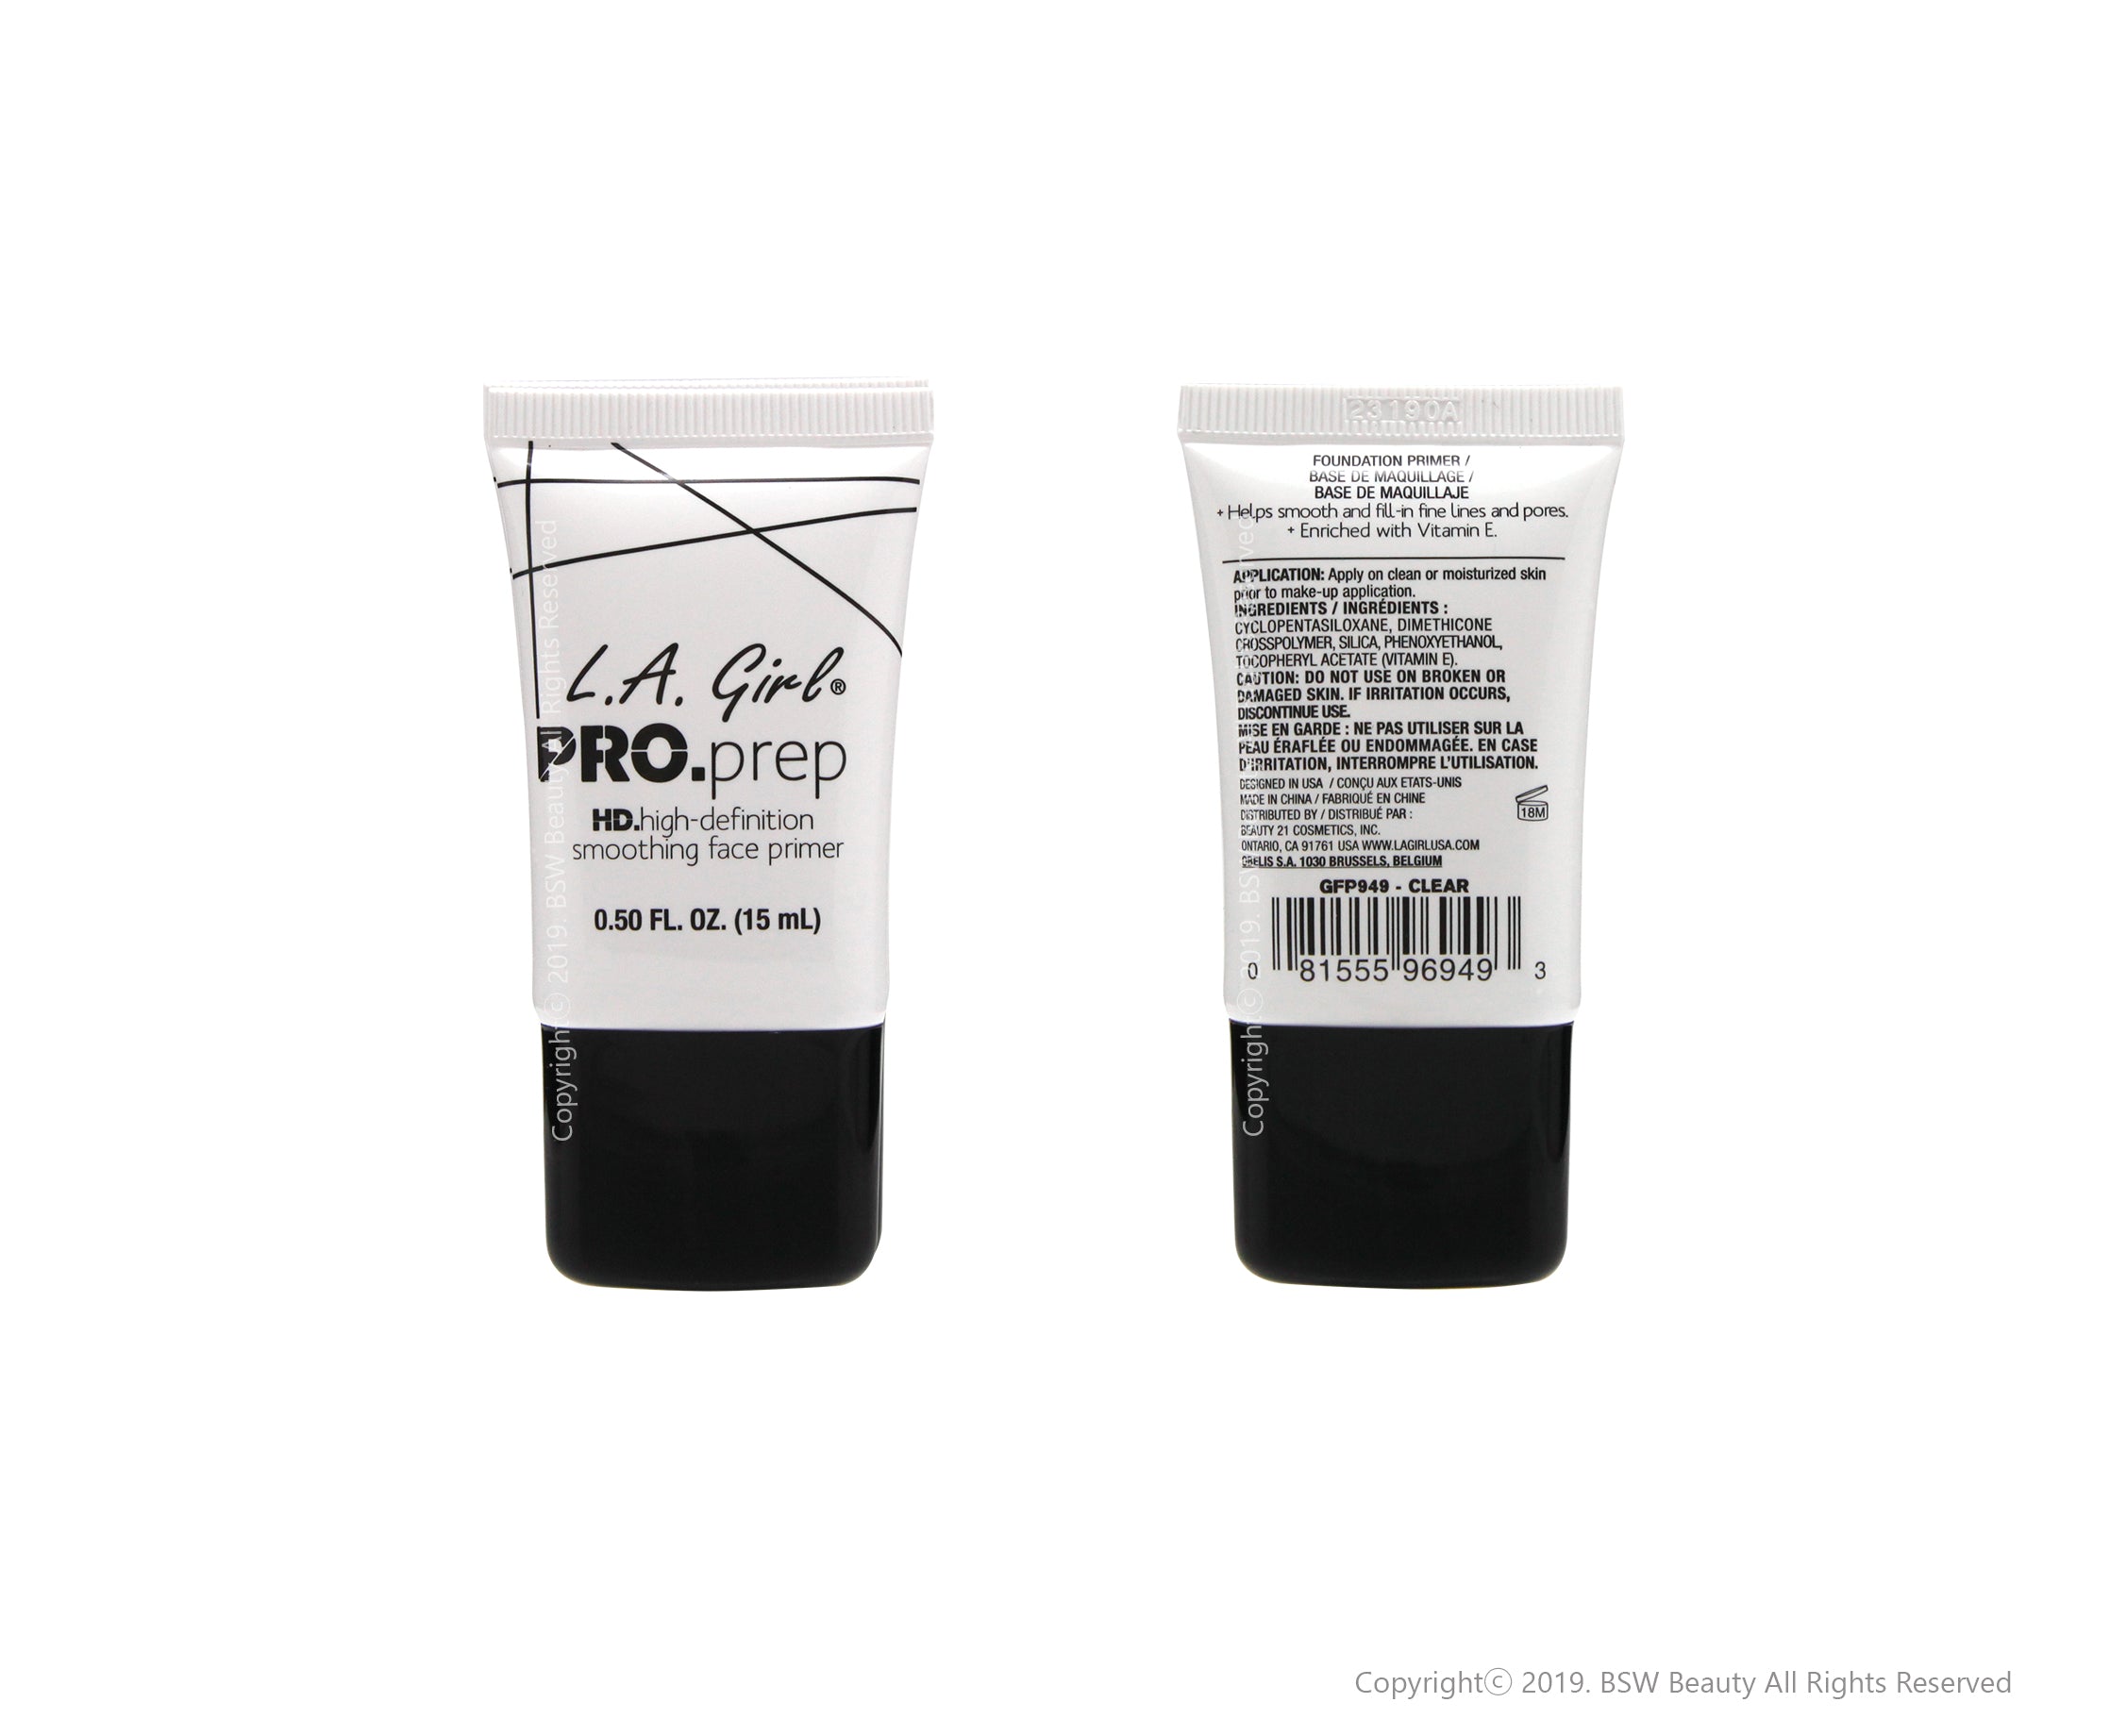 L.A. GIRL PRO PREP HD HIGH DEFINITION SMOOTHING FACE PRIMER 0.5oz #GFP